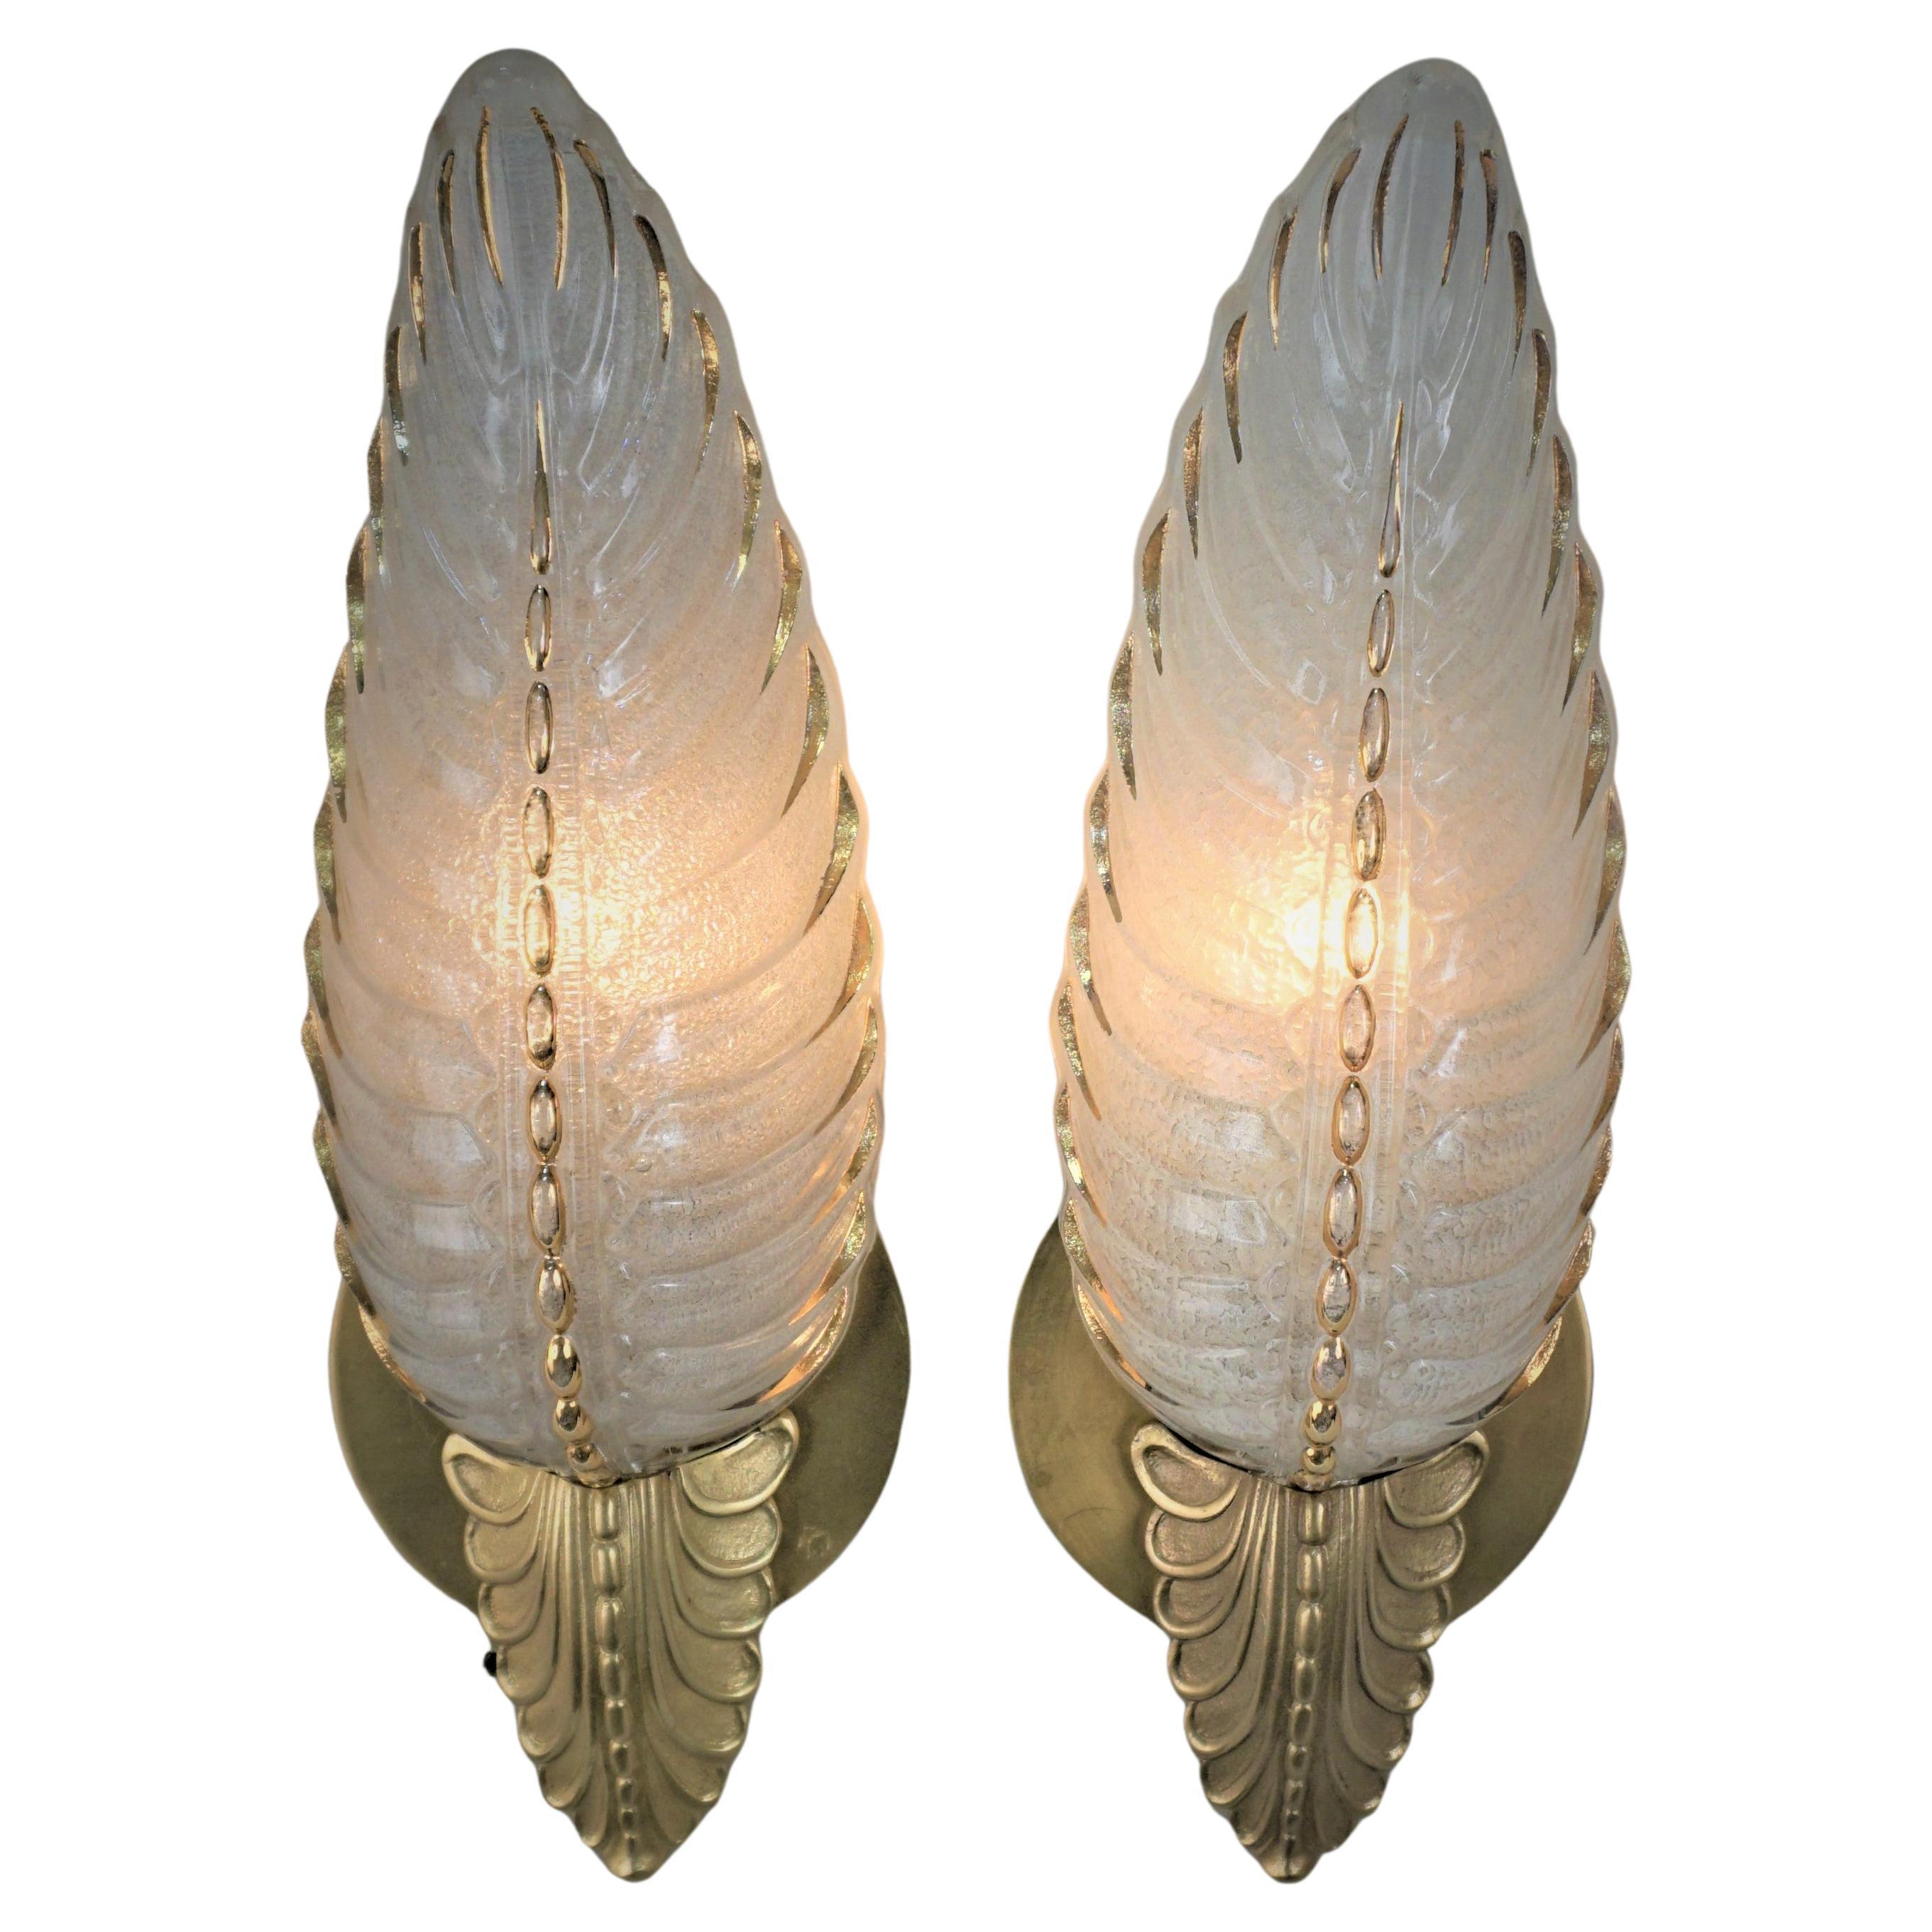  Pair of Art Deco, 1930s, Wall Sconces by Ezan, France For Sale